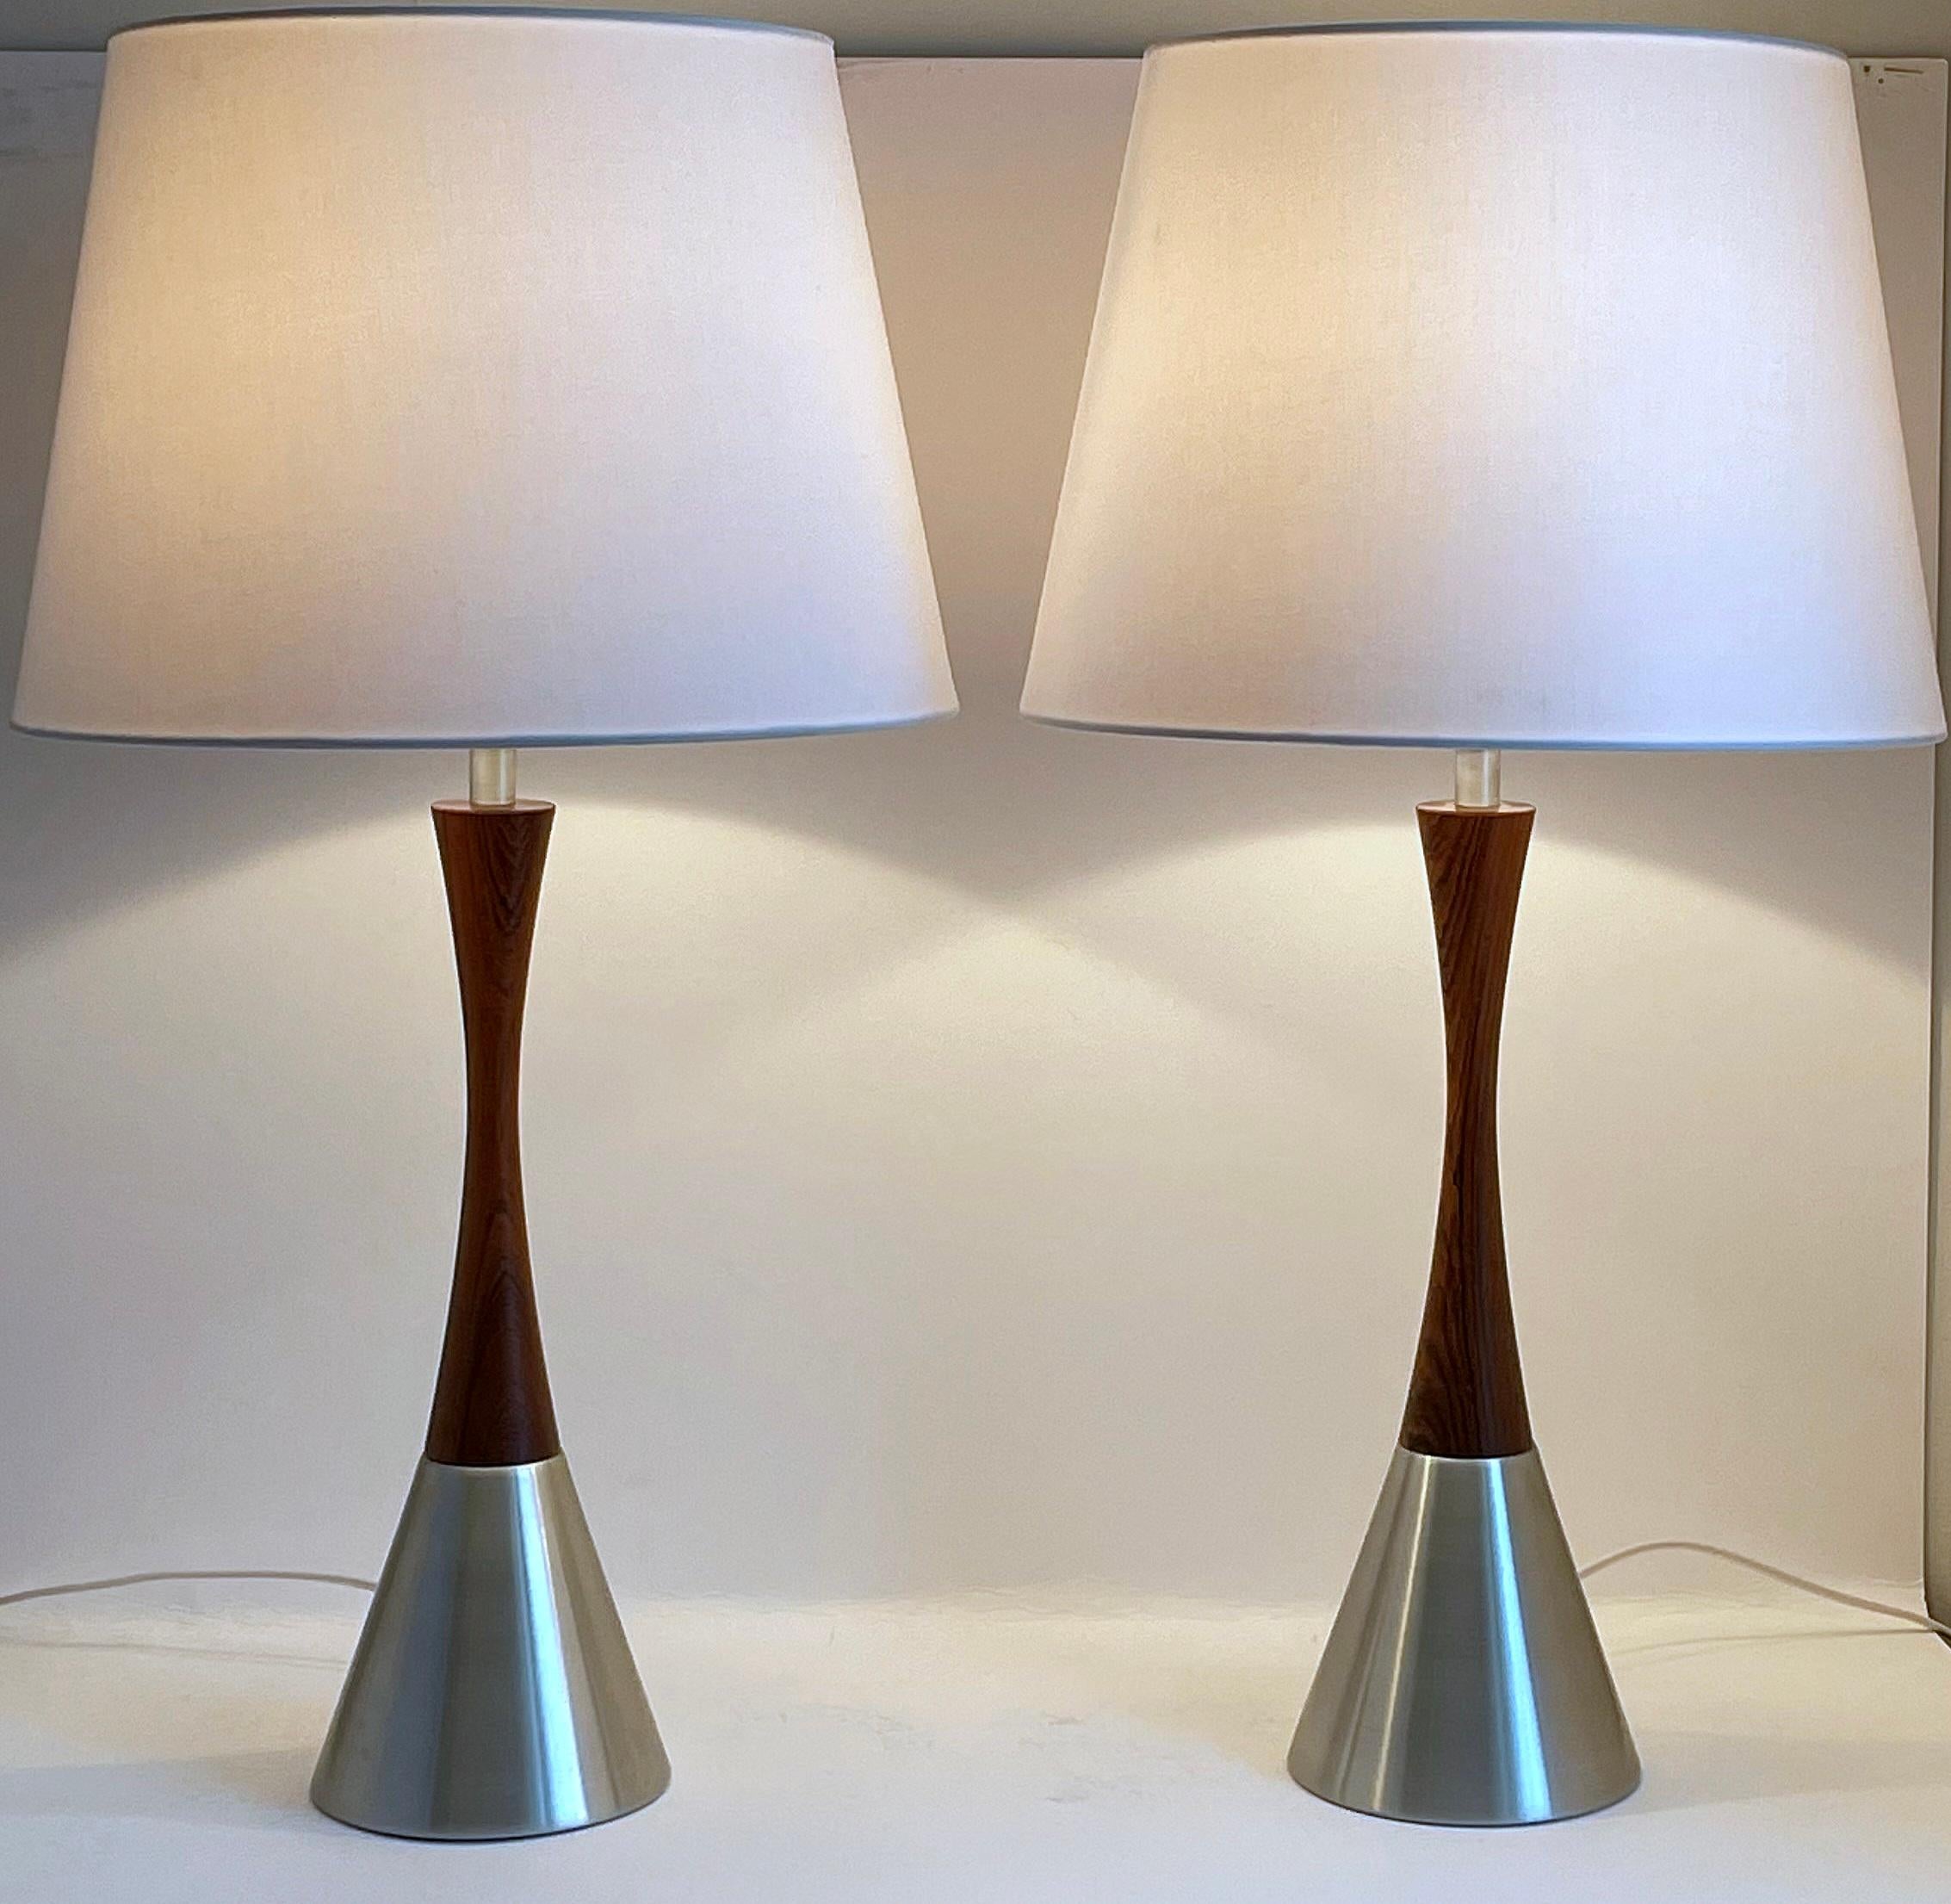 Set of two rare table lamps by Bergboms, Sweden 1960s. The lamps are made of walnut wood and brushed metal. The design is simple and elegant with the slim waist and the beautiful contrast between the wood and the metal. Very good vintage condition.